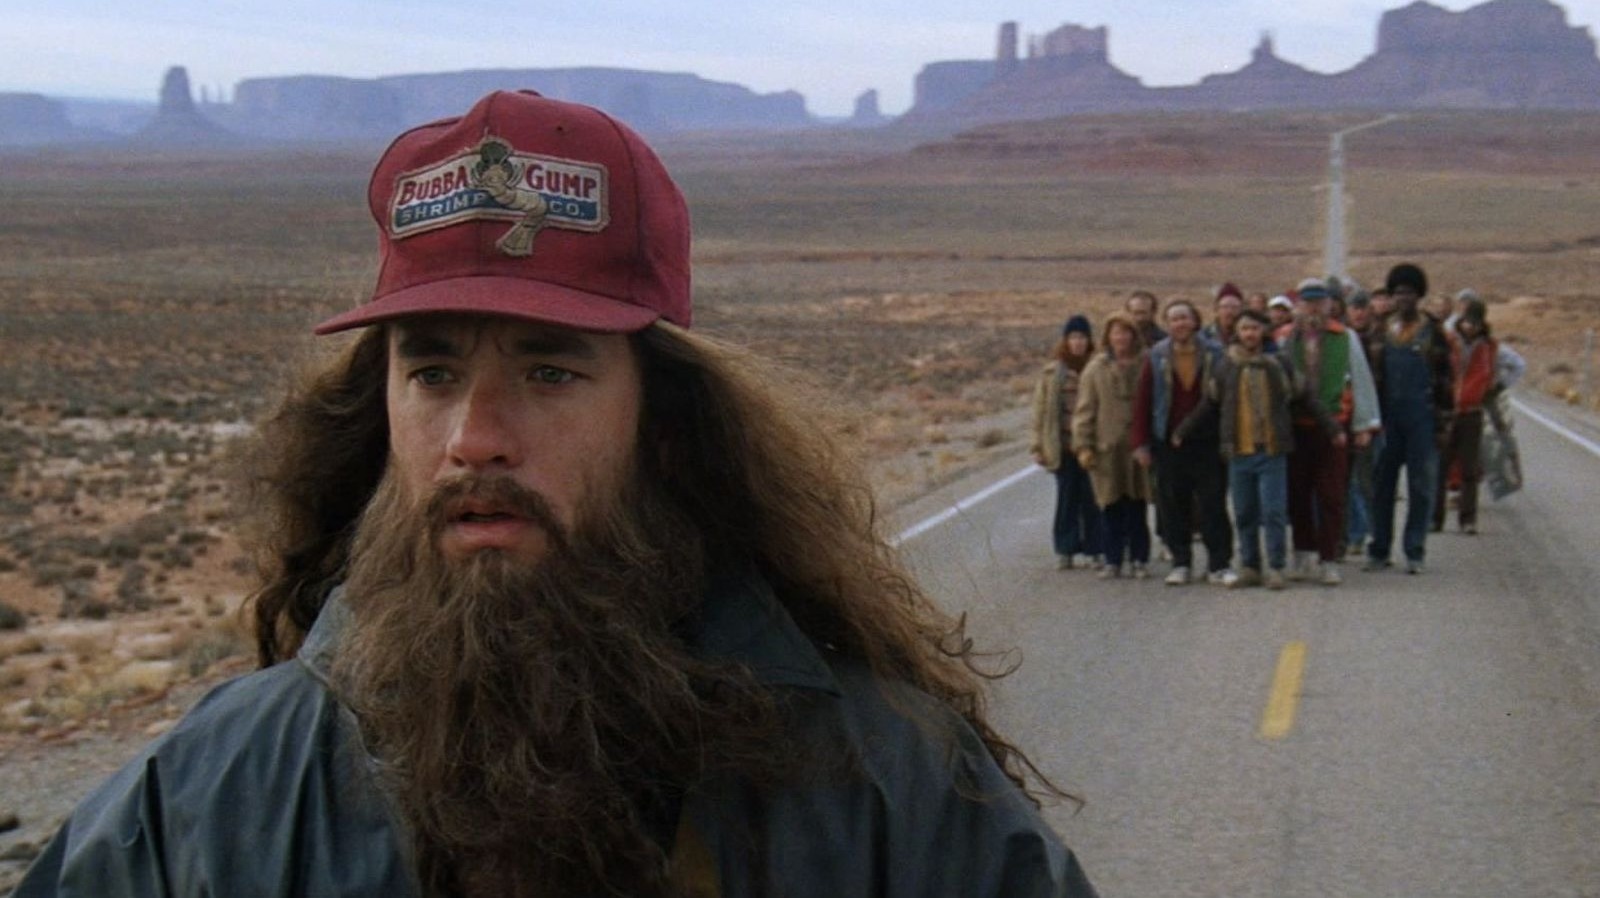 #Tom Hanks, Robert Zemeckis, And Eric Roth Have A Forrest Gump Reunion With Graphic Novel Adaptation, Here